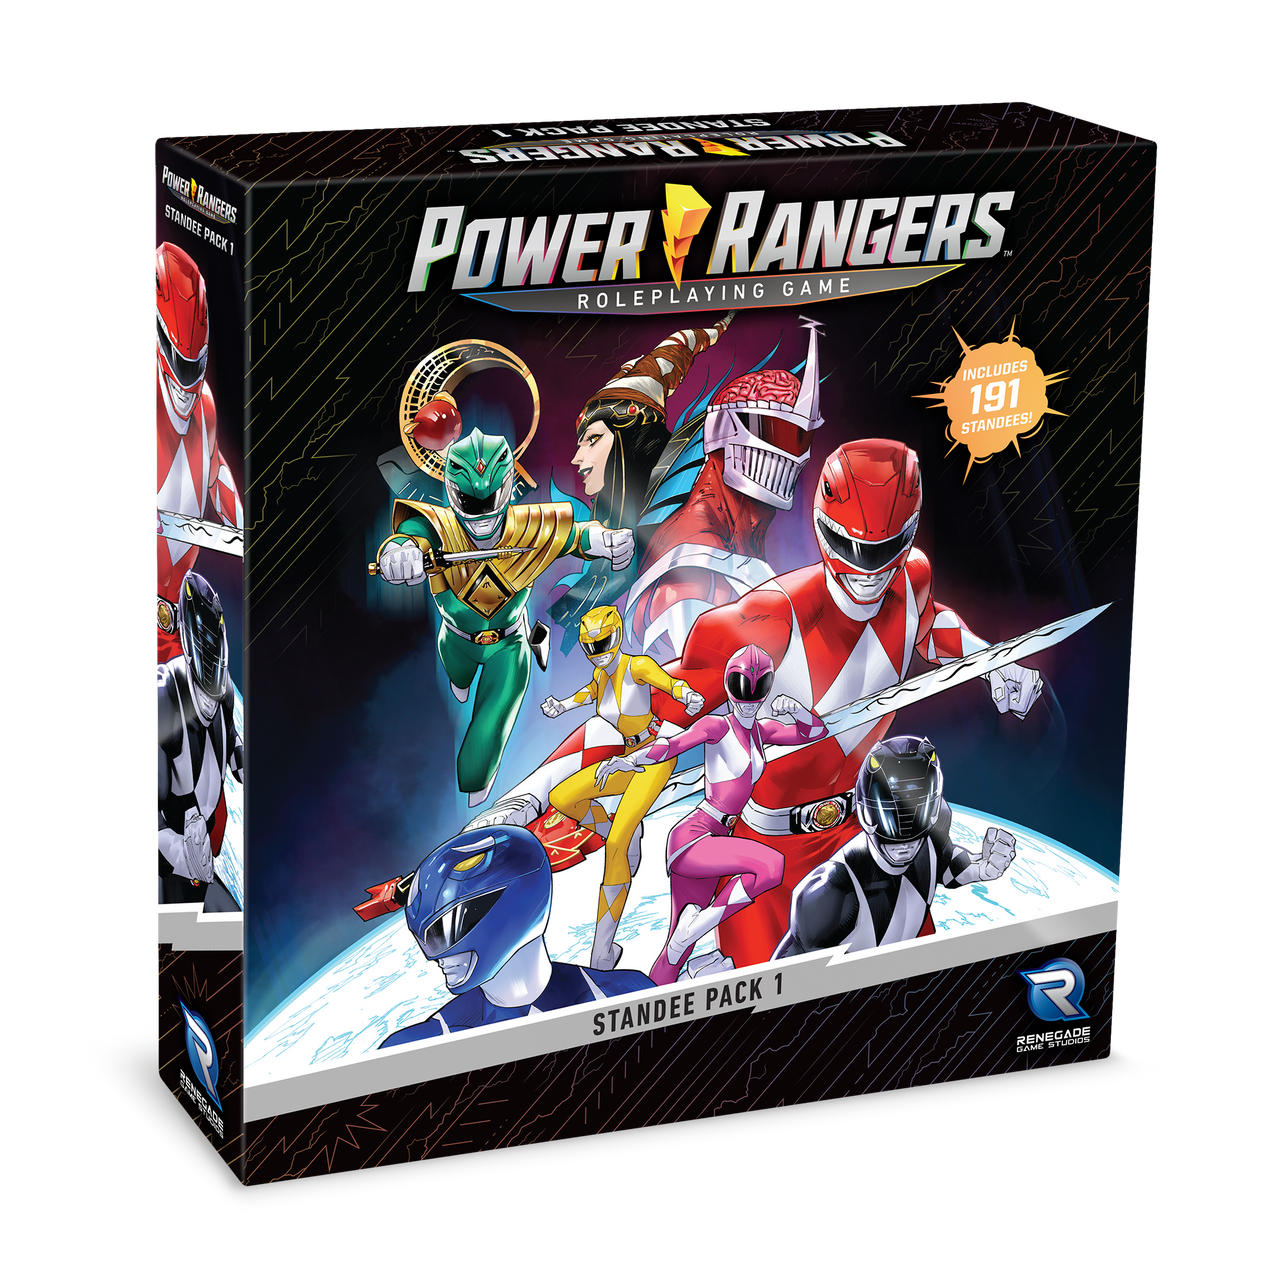 Announcing Day of Destiny - A Power Rangers Roleplaying Game Actual Play! -  Renegade Game Studios